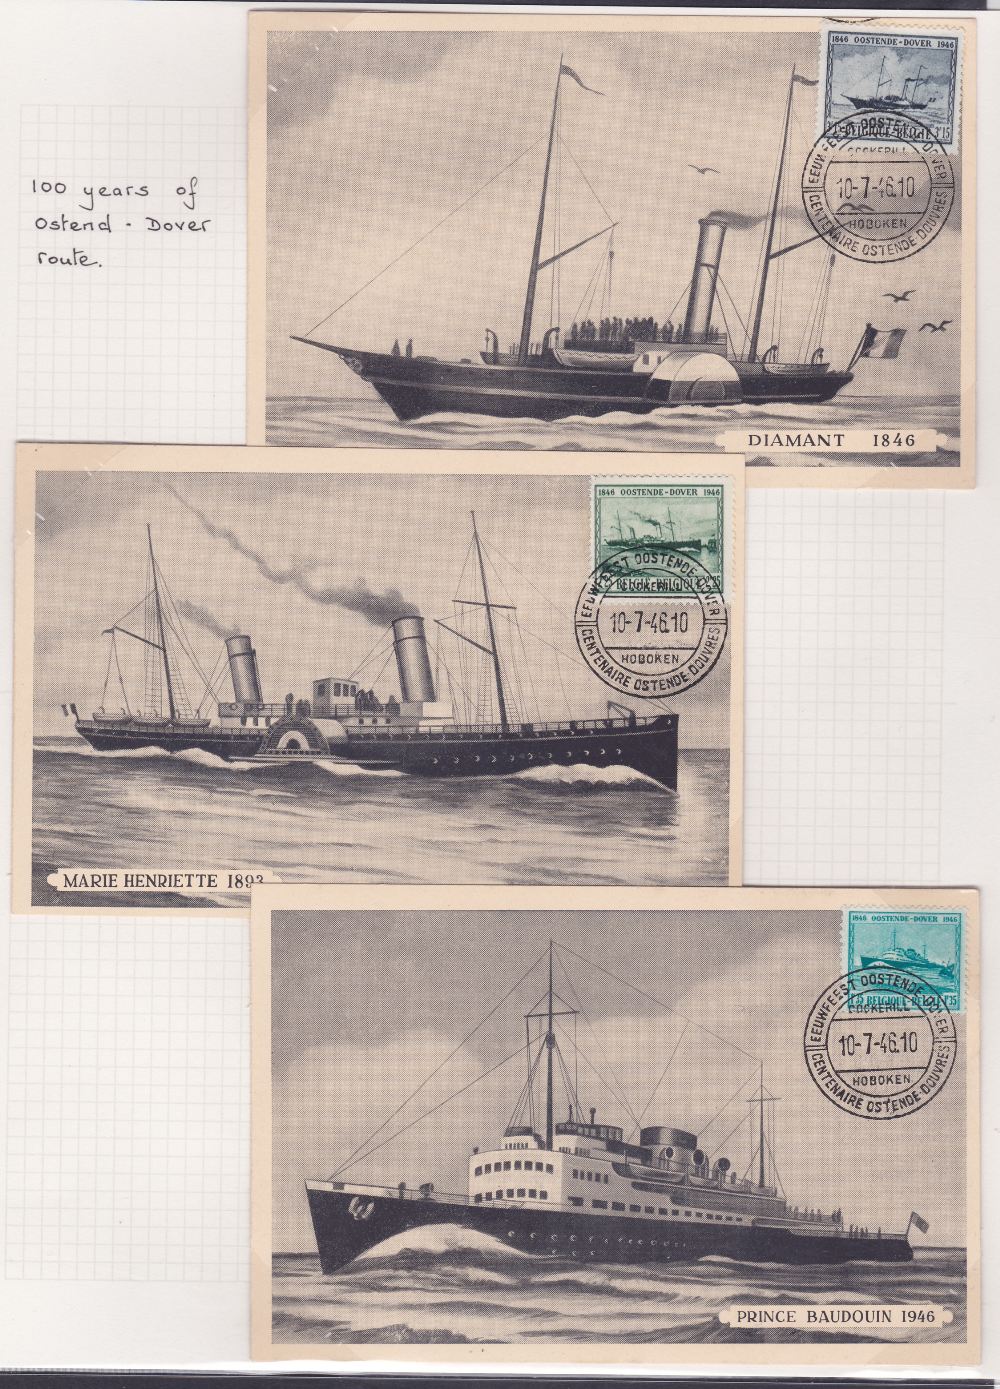 KENT POSTAL HISTORY , Dover Paquebots - a fine collection of postcards, postal stationery, - Image 3 of 5